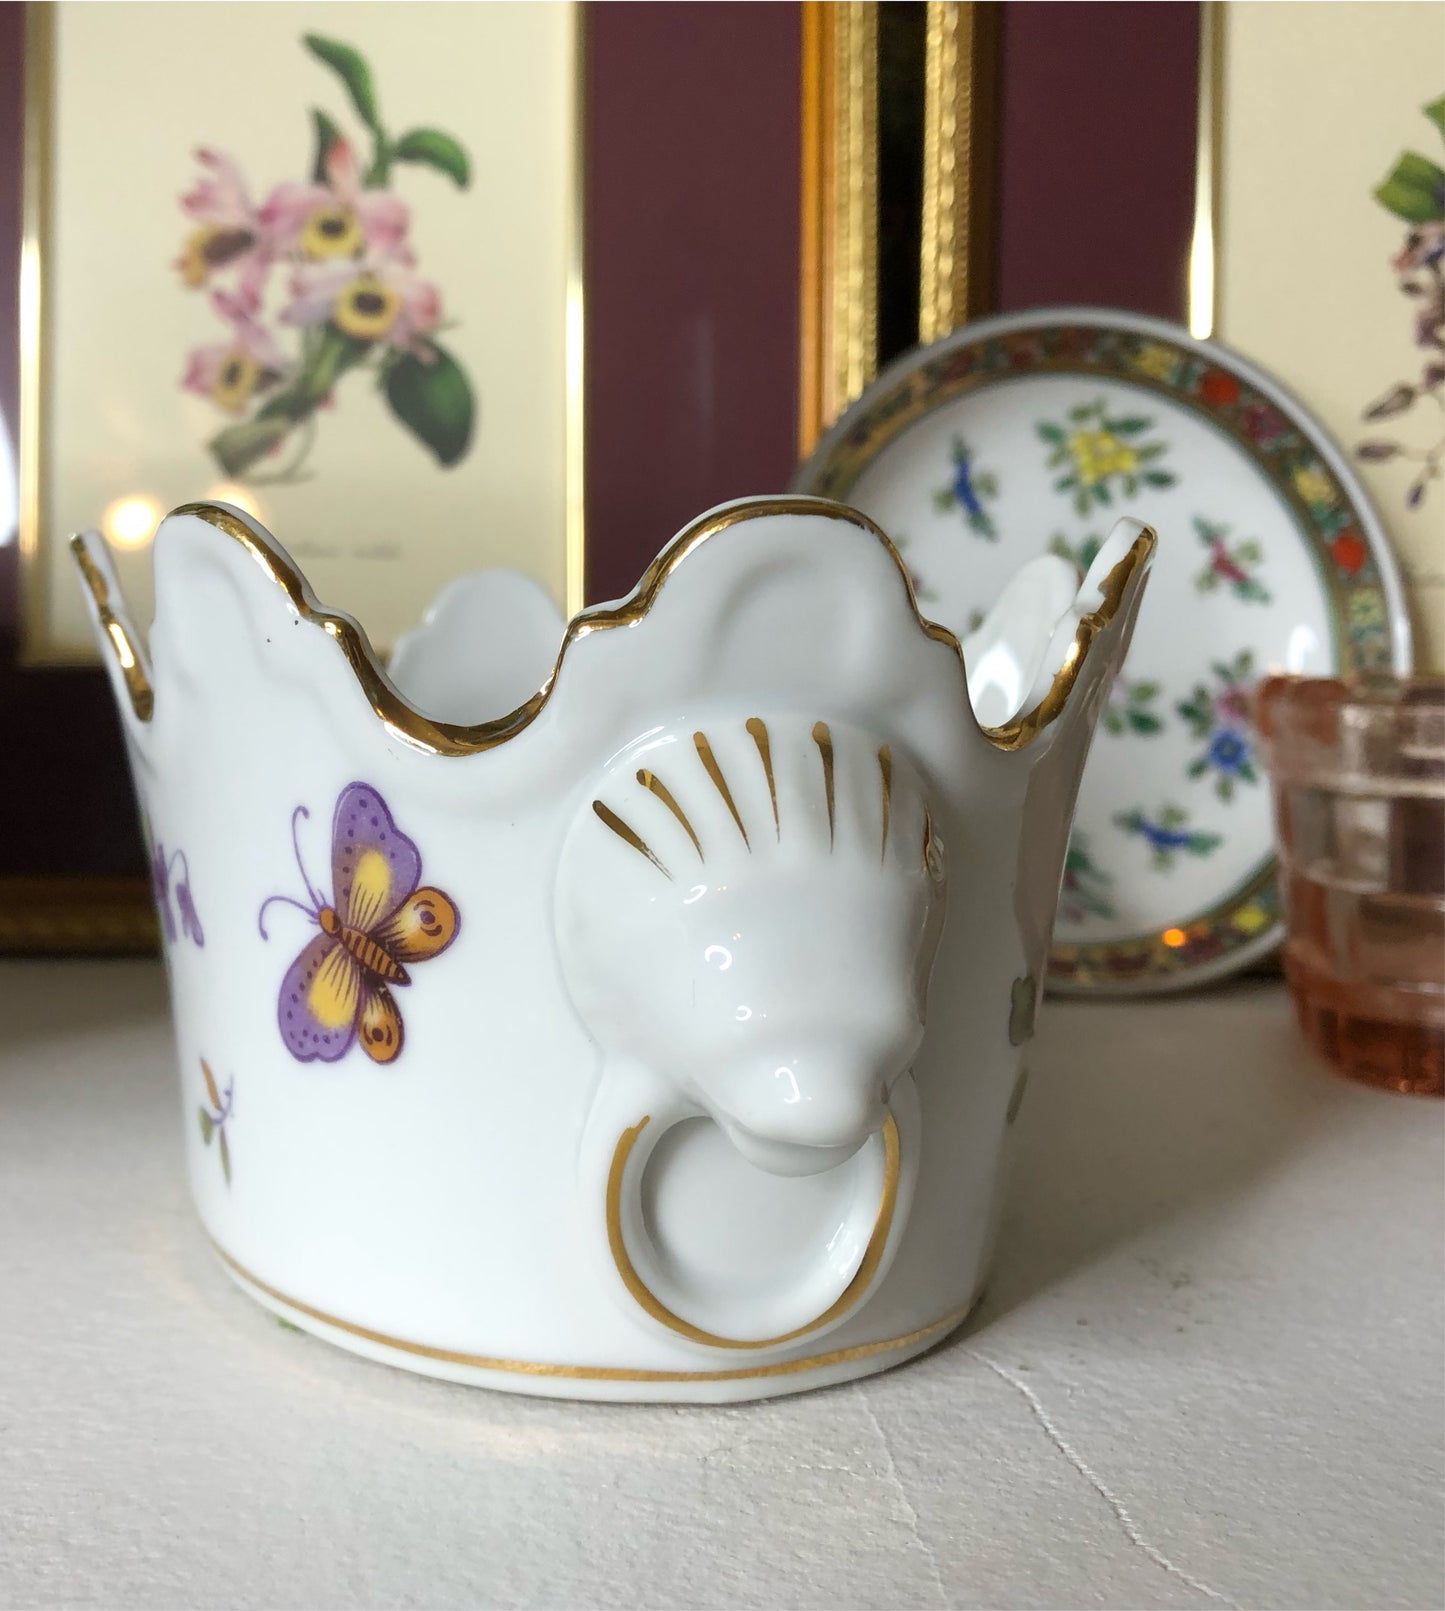 Vintage Andrea by Sadek scalloped oval cache pot with flowers, butterflies, and lion handles - Excellent condition!